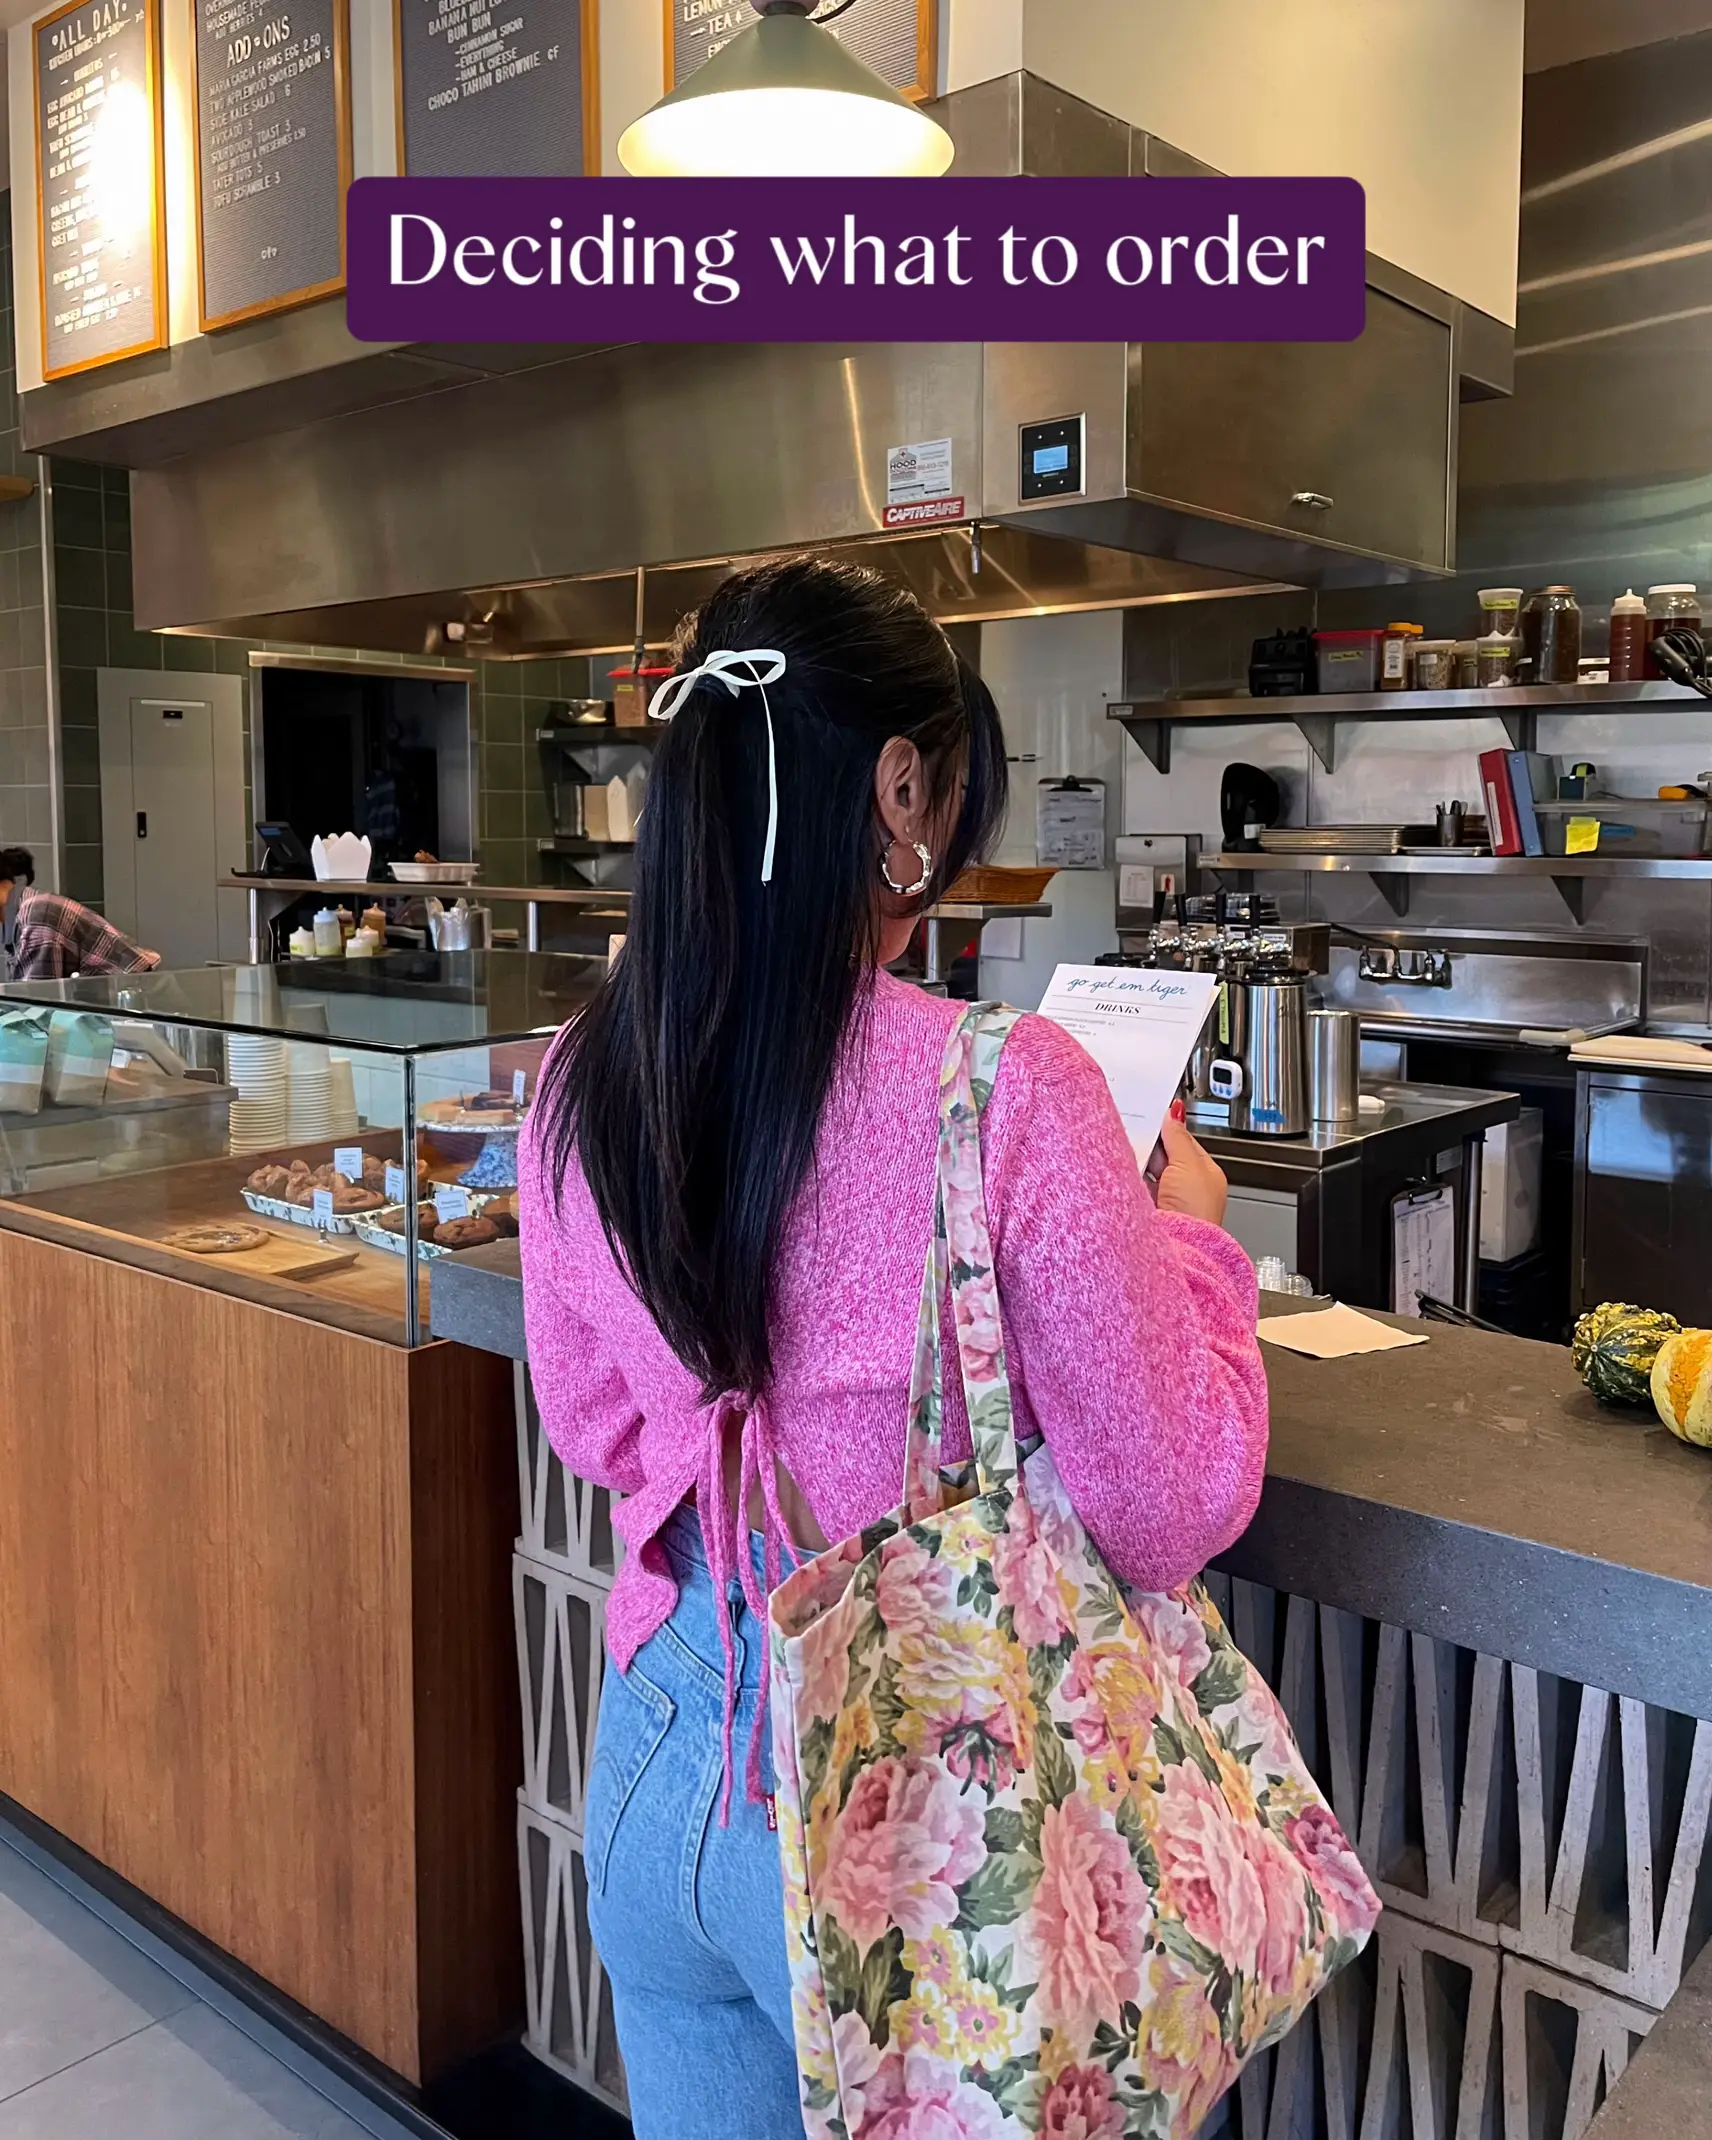  A woman is standing at a counter in a restaurant, looking at her menu.